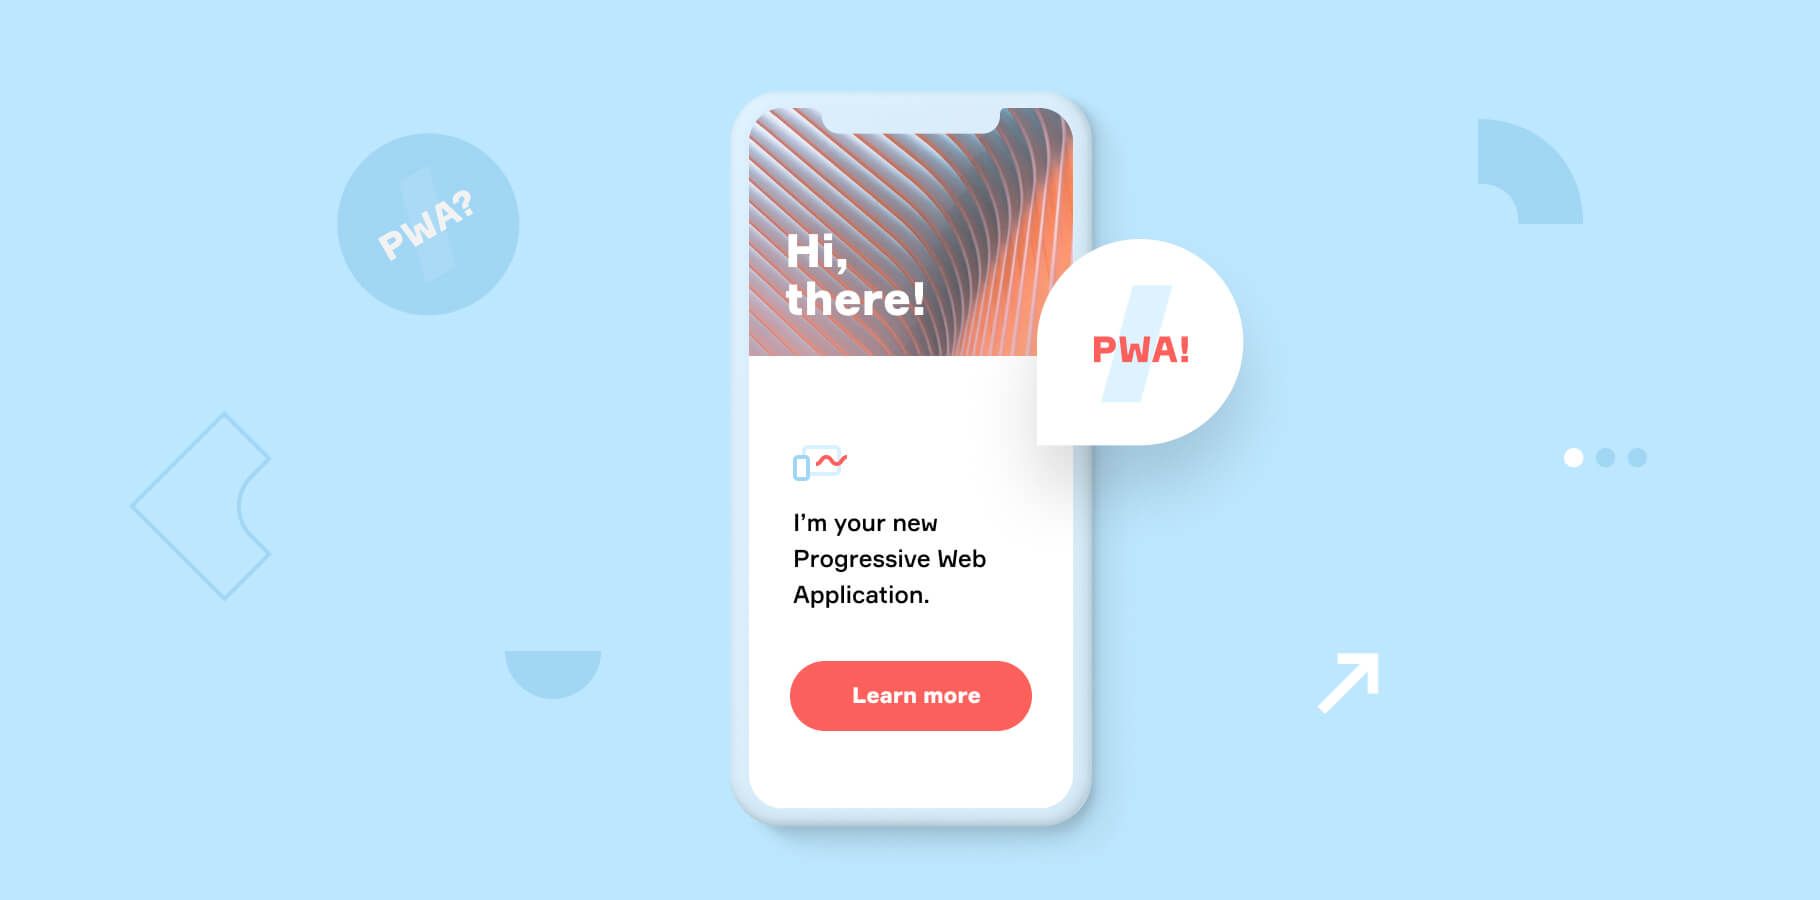 WHAT IS PWA?